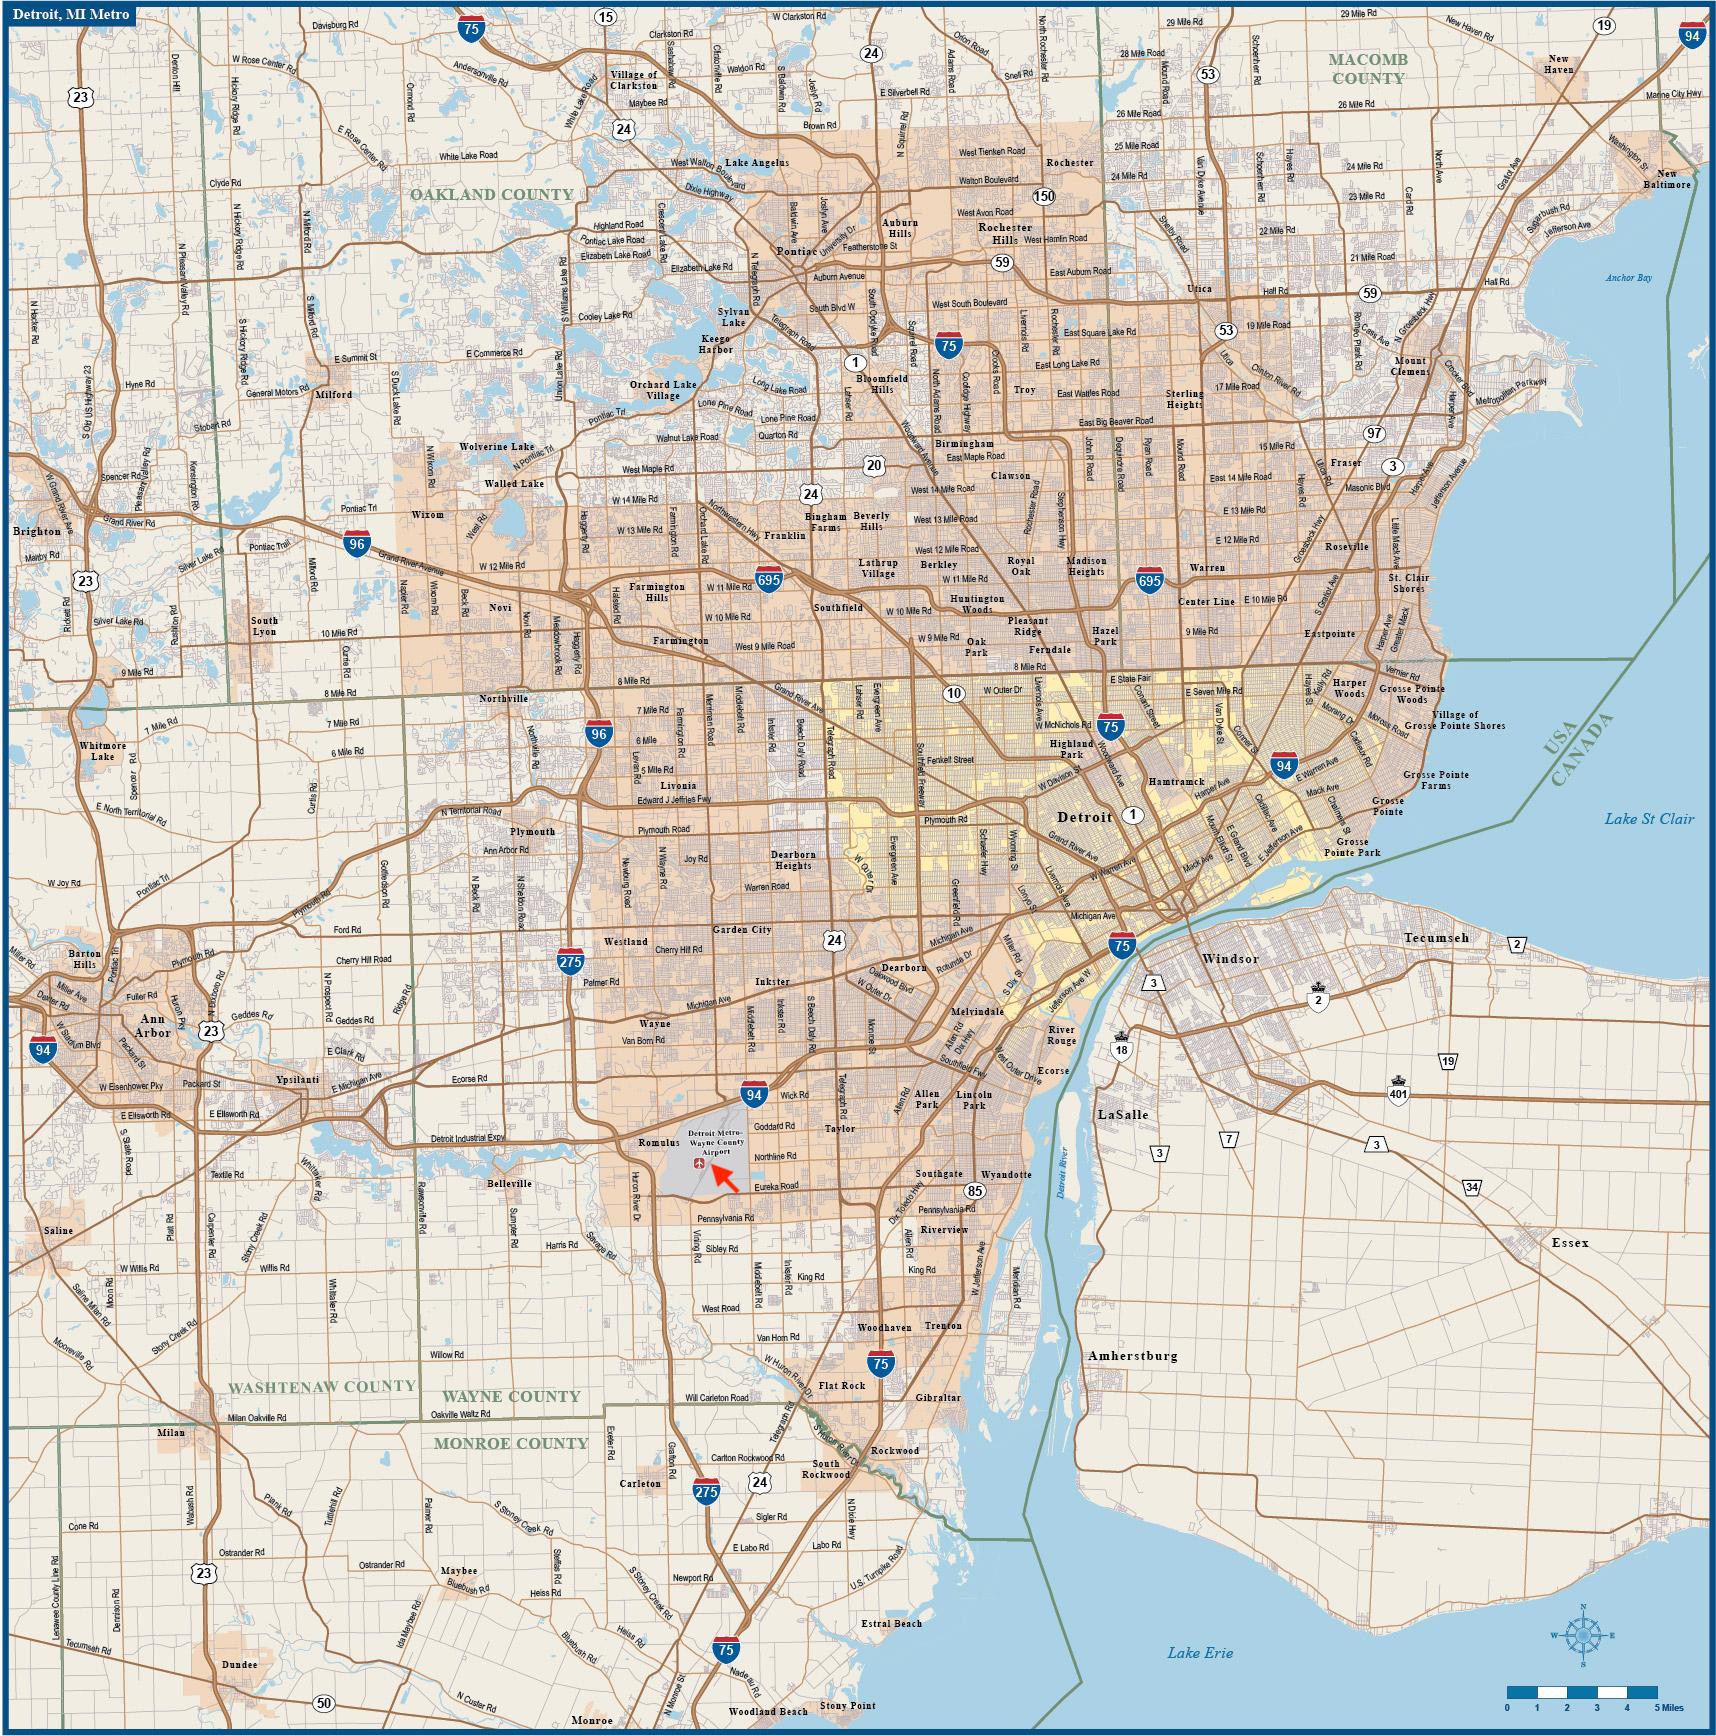 Map of Detroit airport: airport terminals and airport gates of Detroit